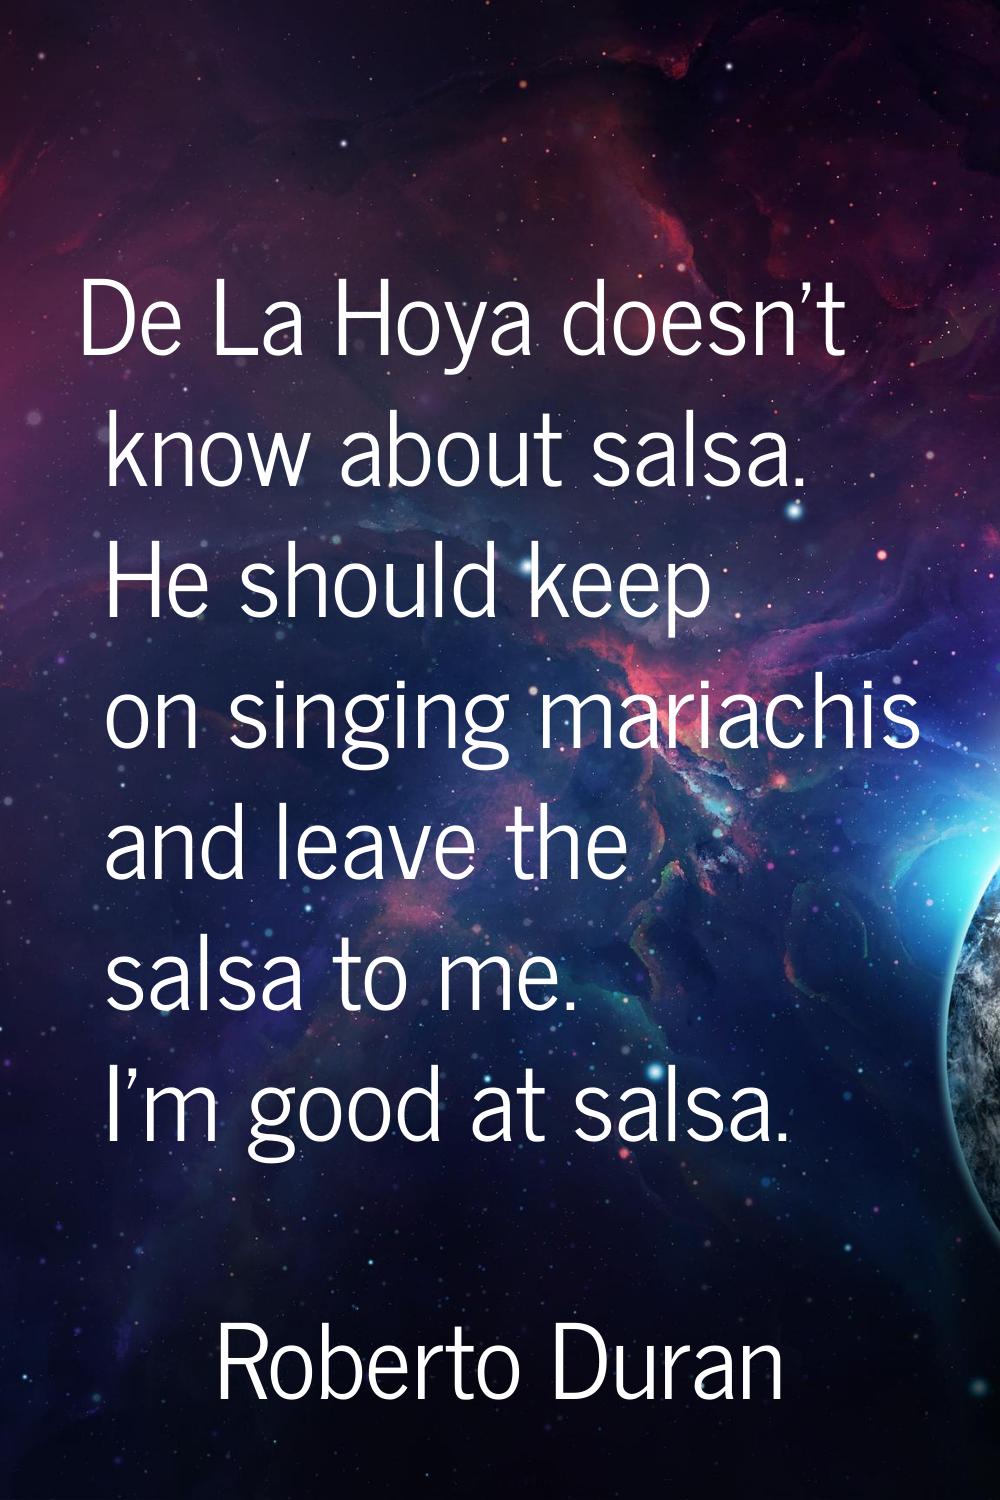 De La Hoya doesn't know about salsa. He should keep on singing mariachis and leave the salsa to me.